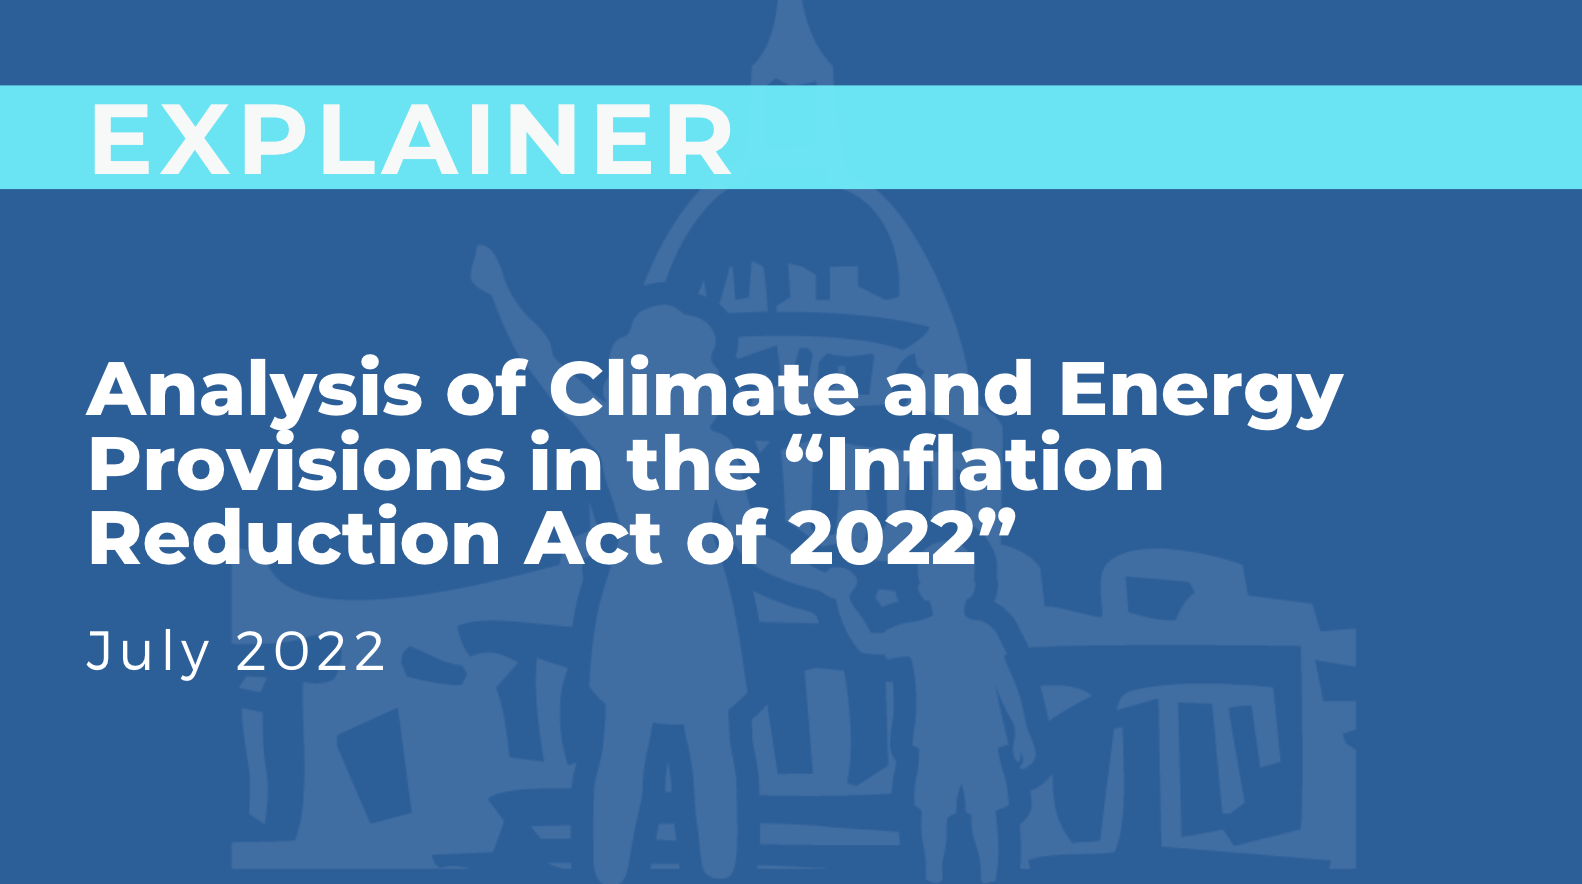 Analysis of Climate and Energy Provisions in the “Inflation Reduction Act of 2022”